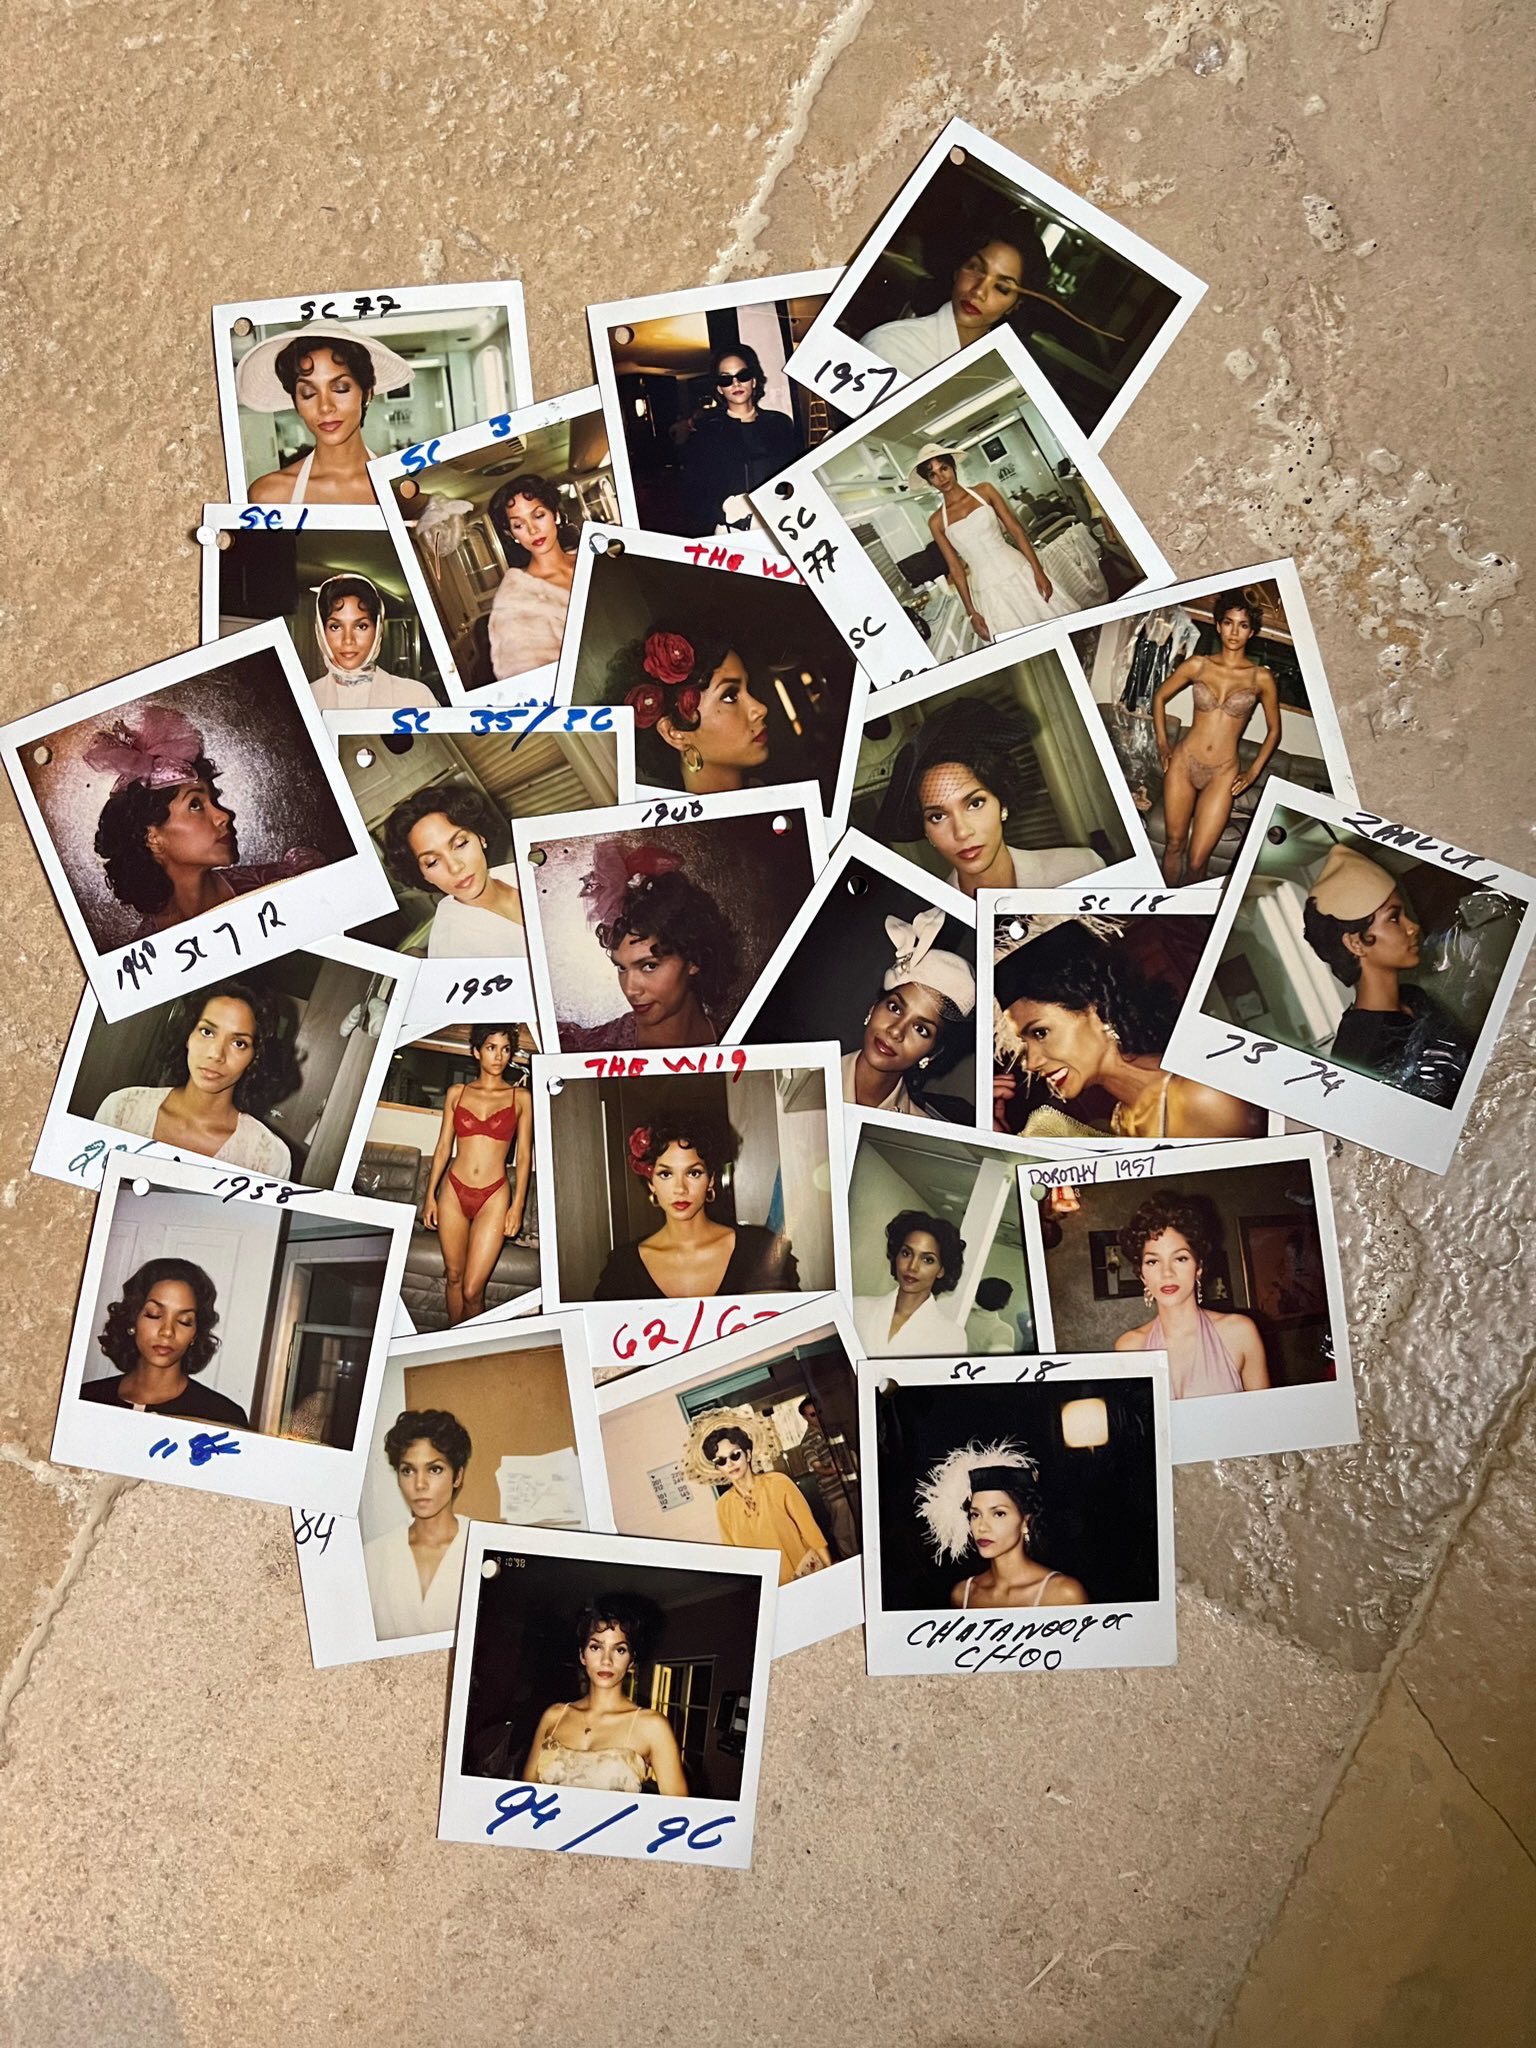 Halle Berry Shares Some 90’s Lingerie Throwbacks! - Photo 1